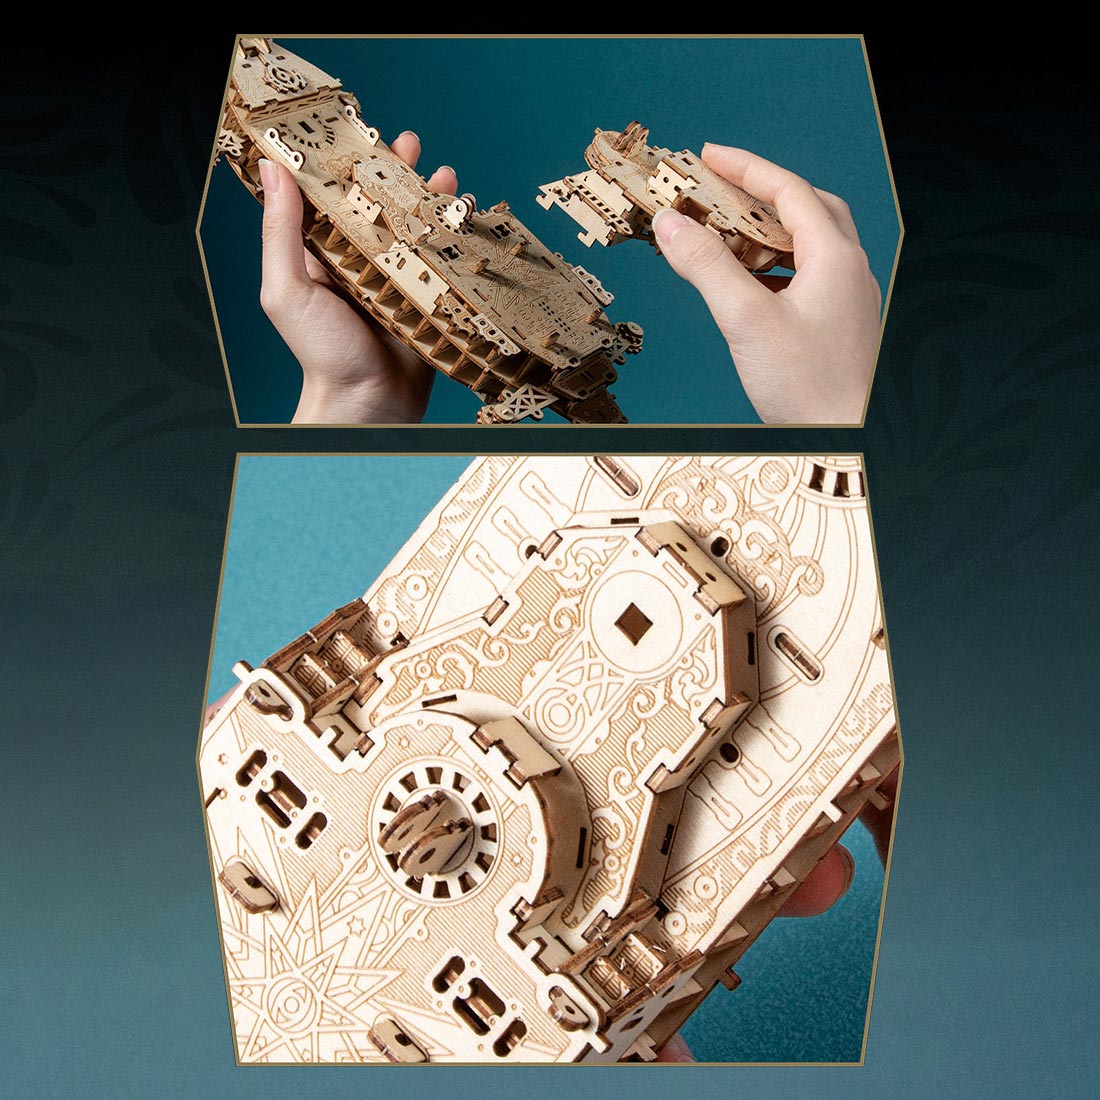 Mysteries Pirate Ship of Future 3D Wooden Puzzle Kits